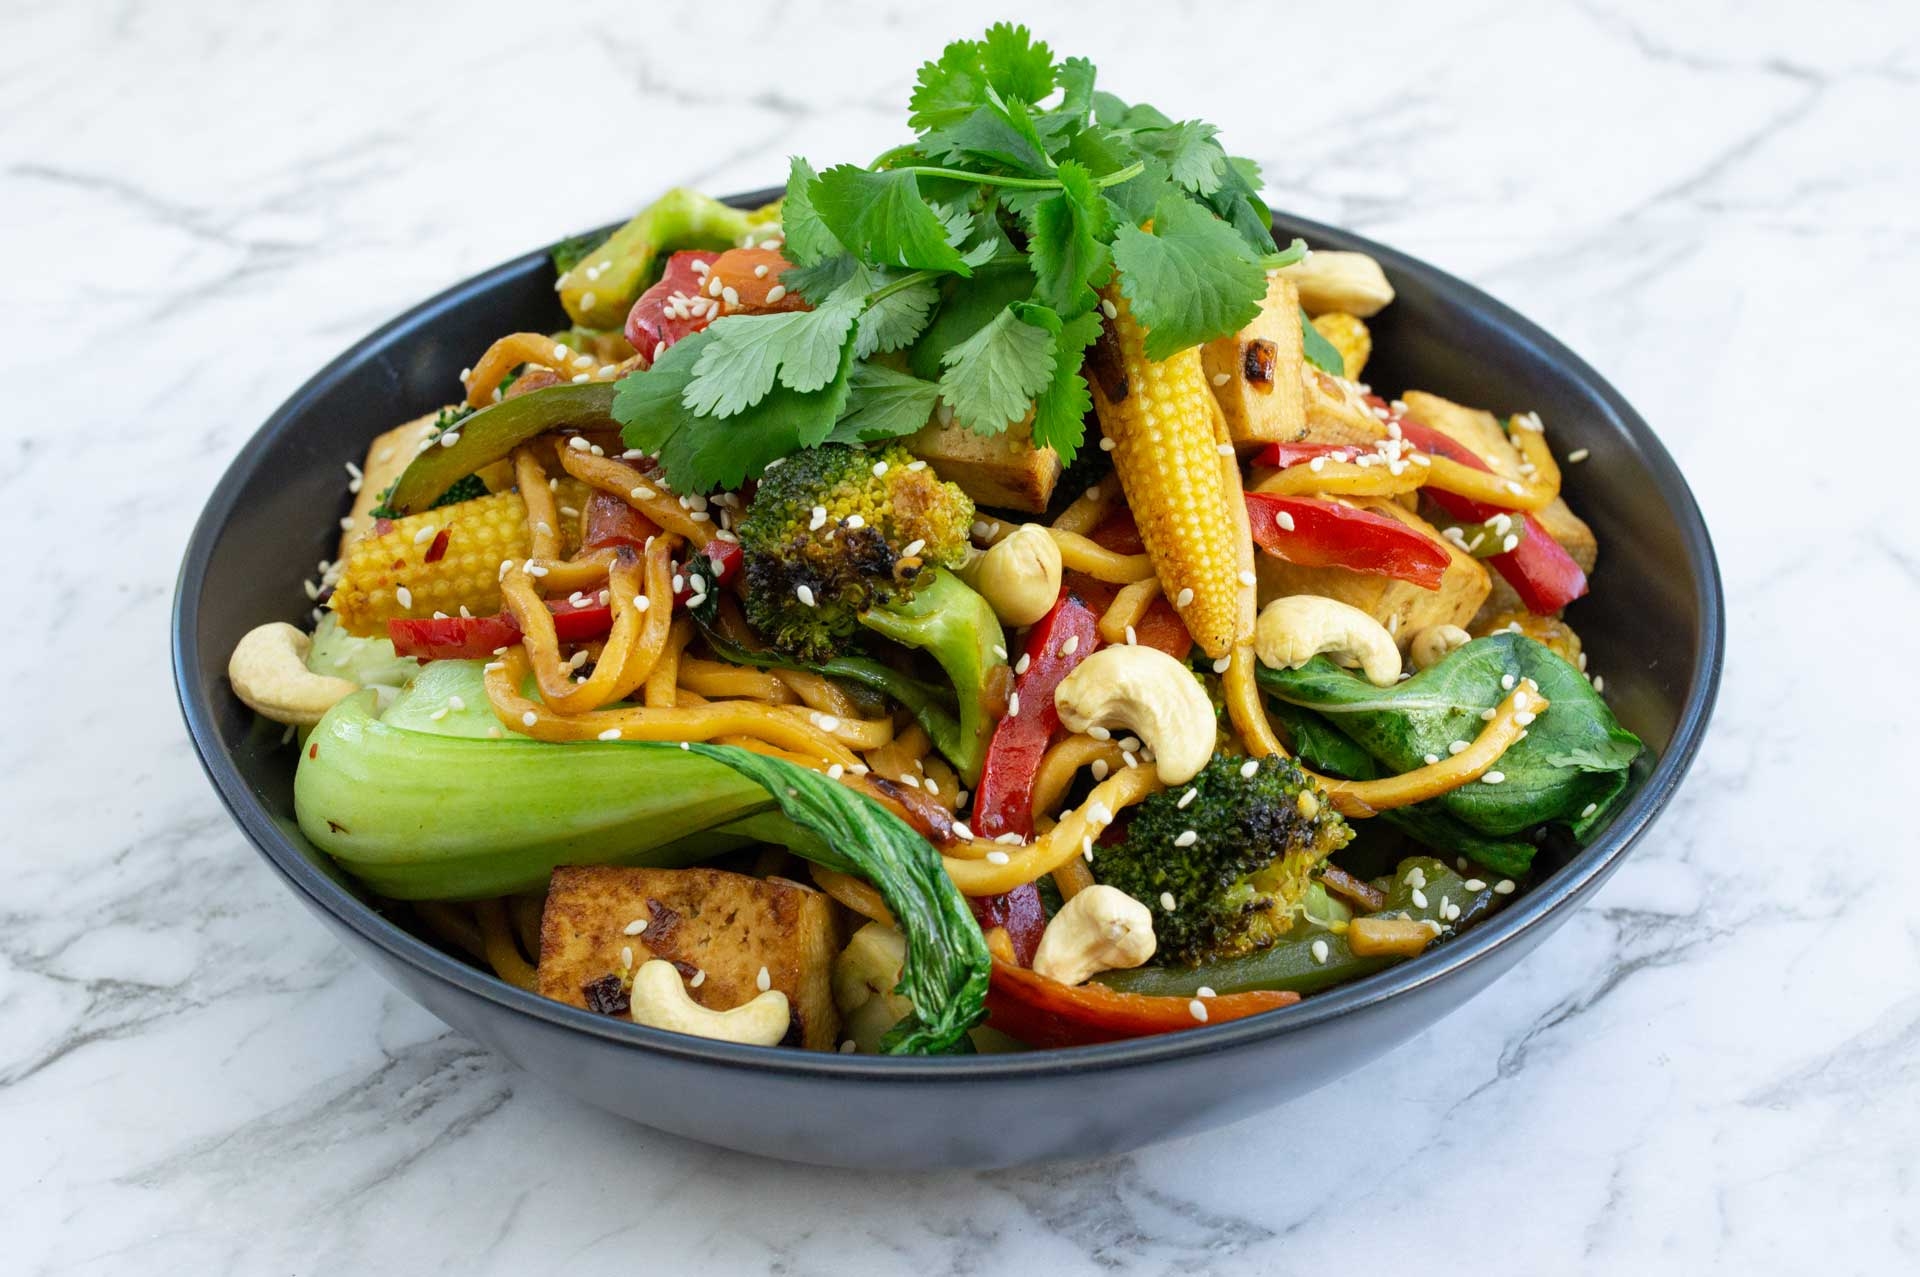 A delicious bowl of noodles topped with fresh vegetables, coriander and crunchy cashews.